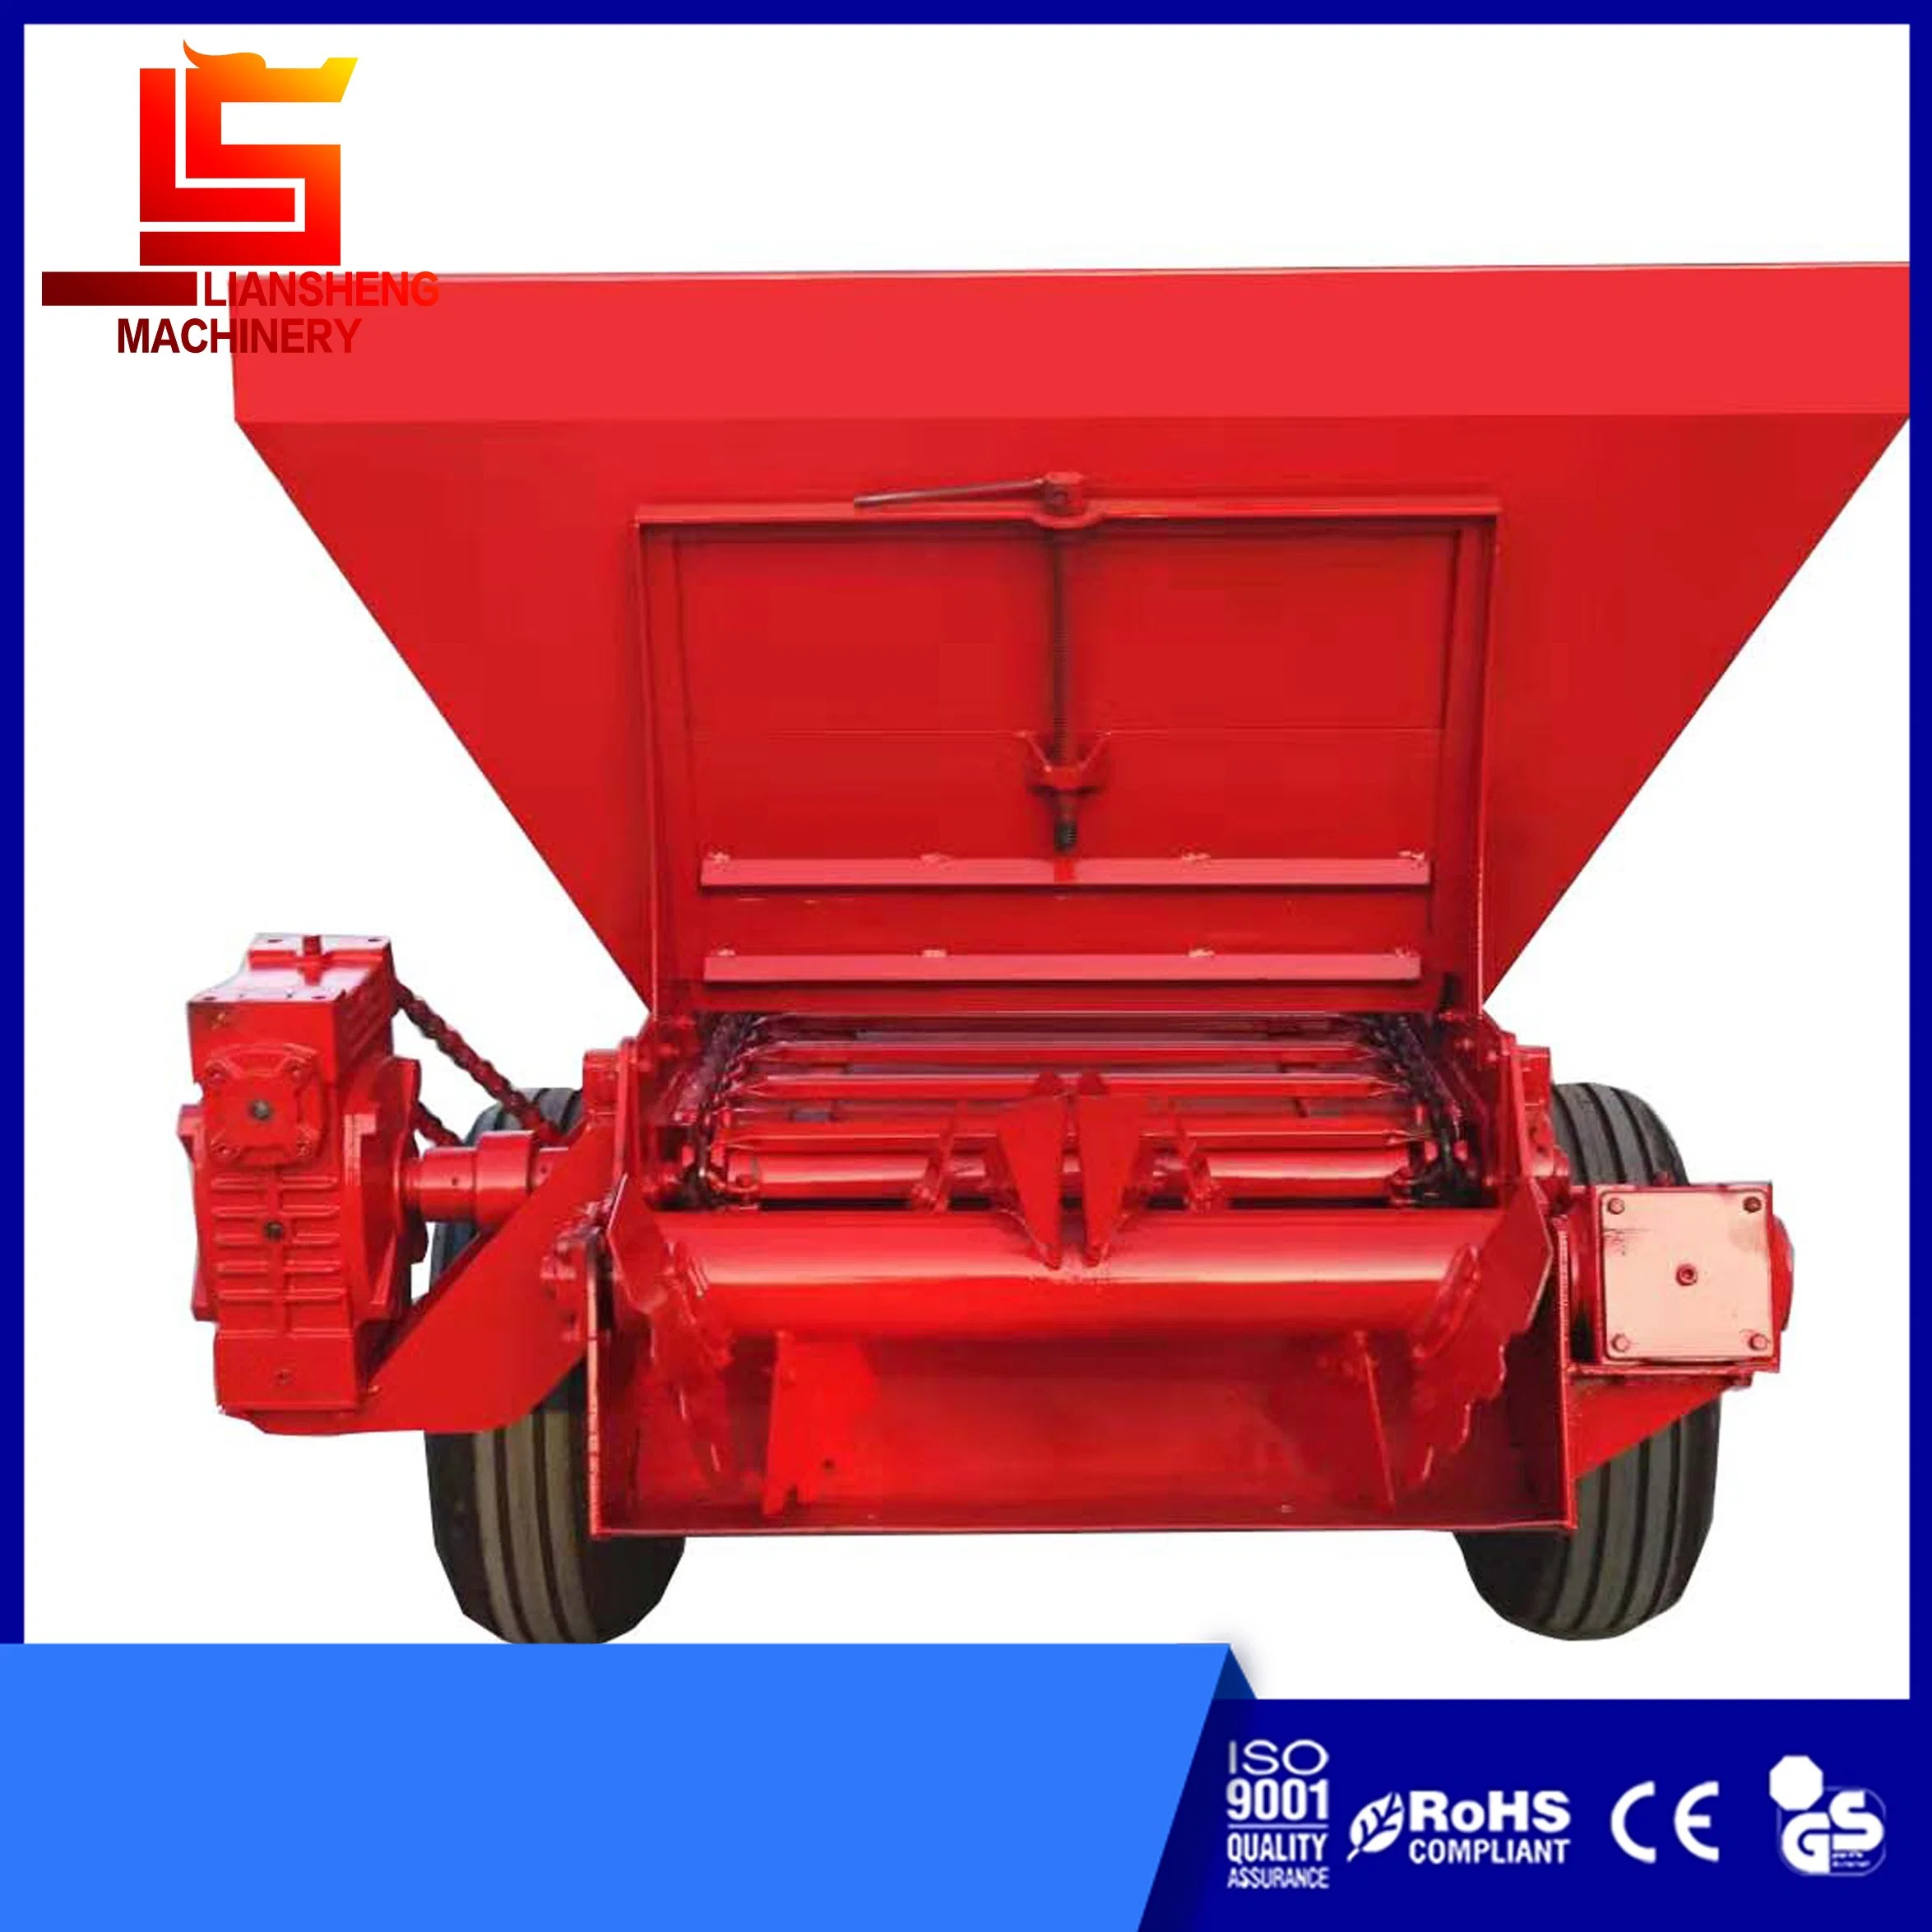 Agricultural Machinery Pure Mechanical Wet Manure Spreader, Used for Manure Spreading in Field Orchards, Green Garden Sheds, etc.